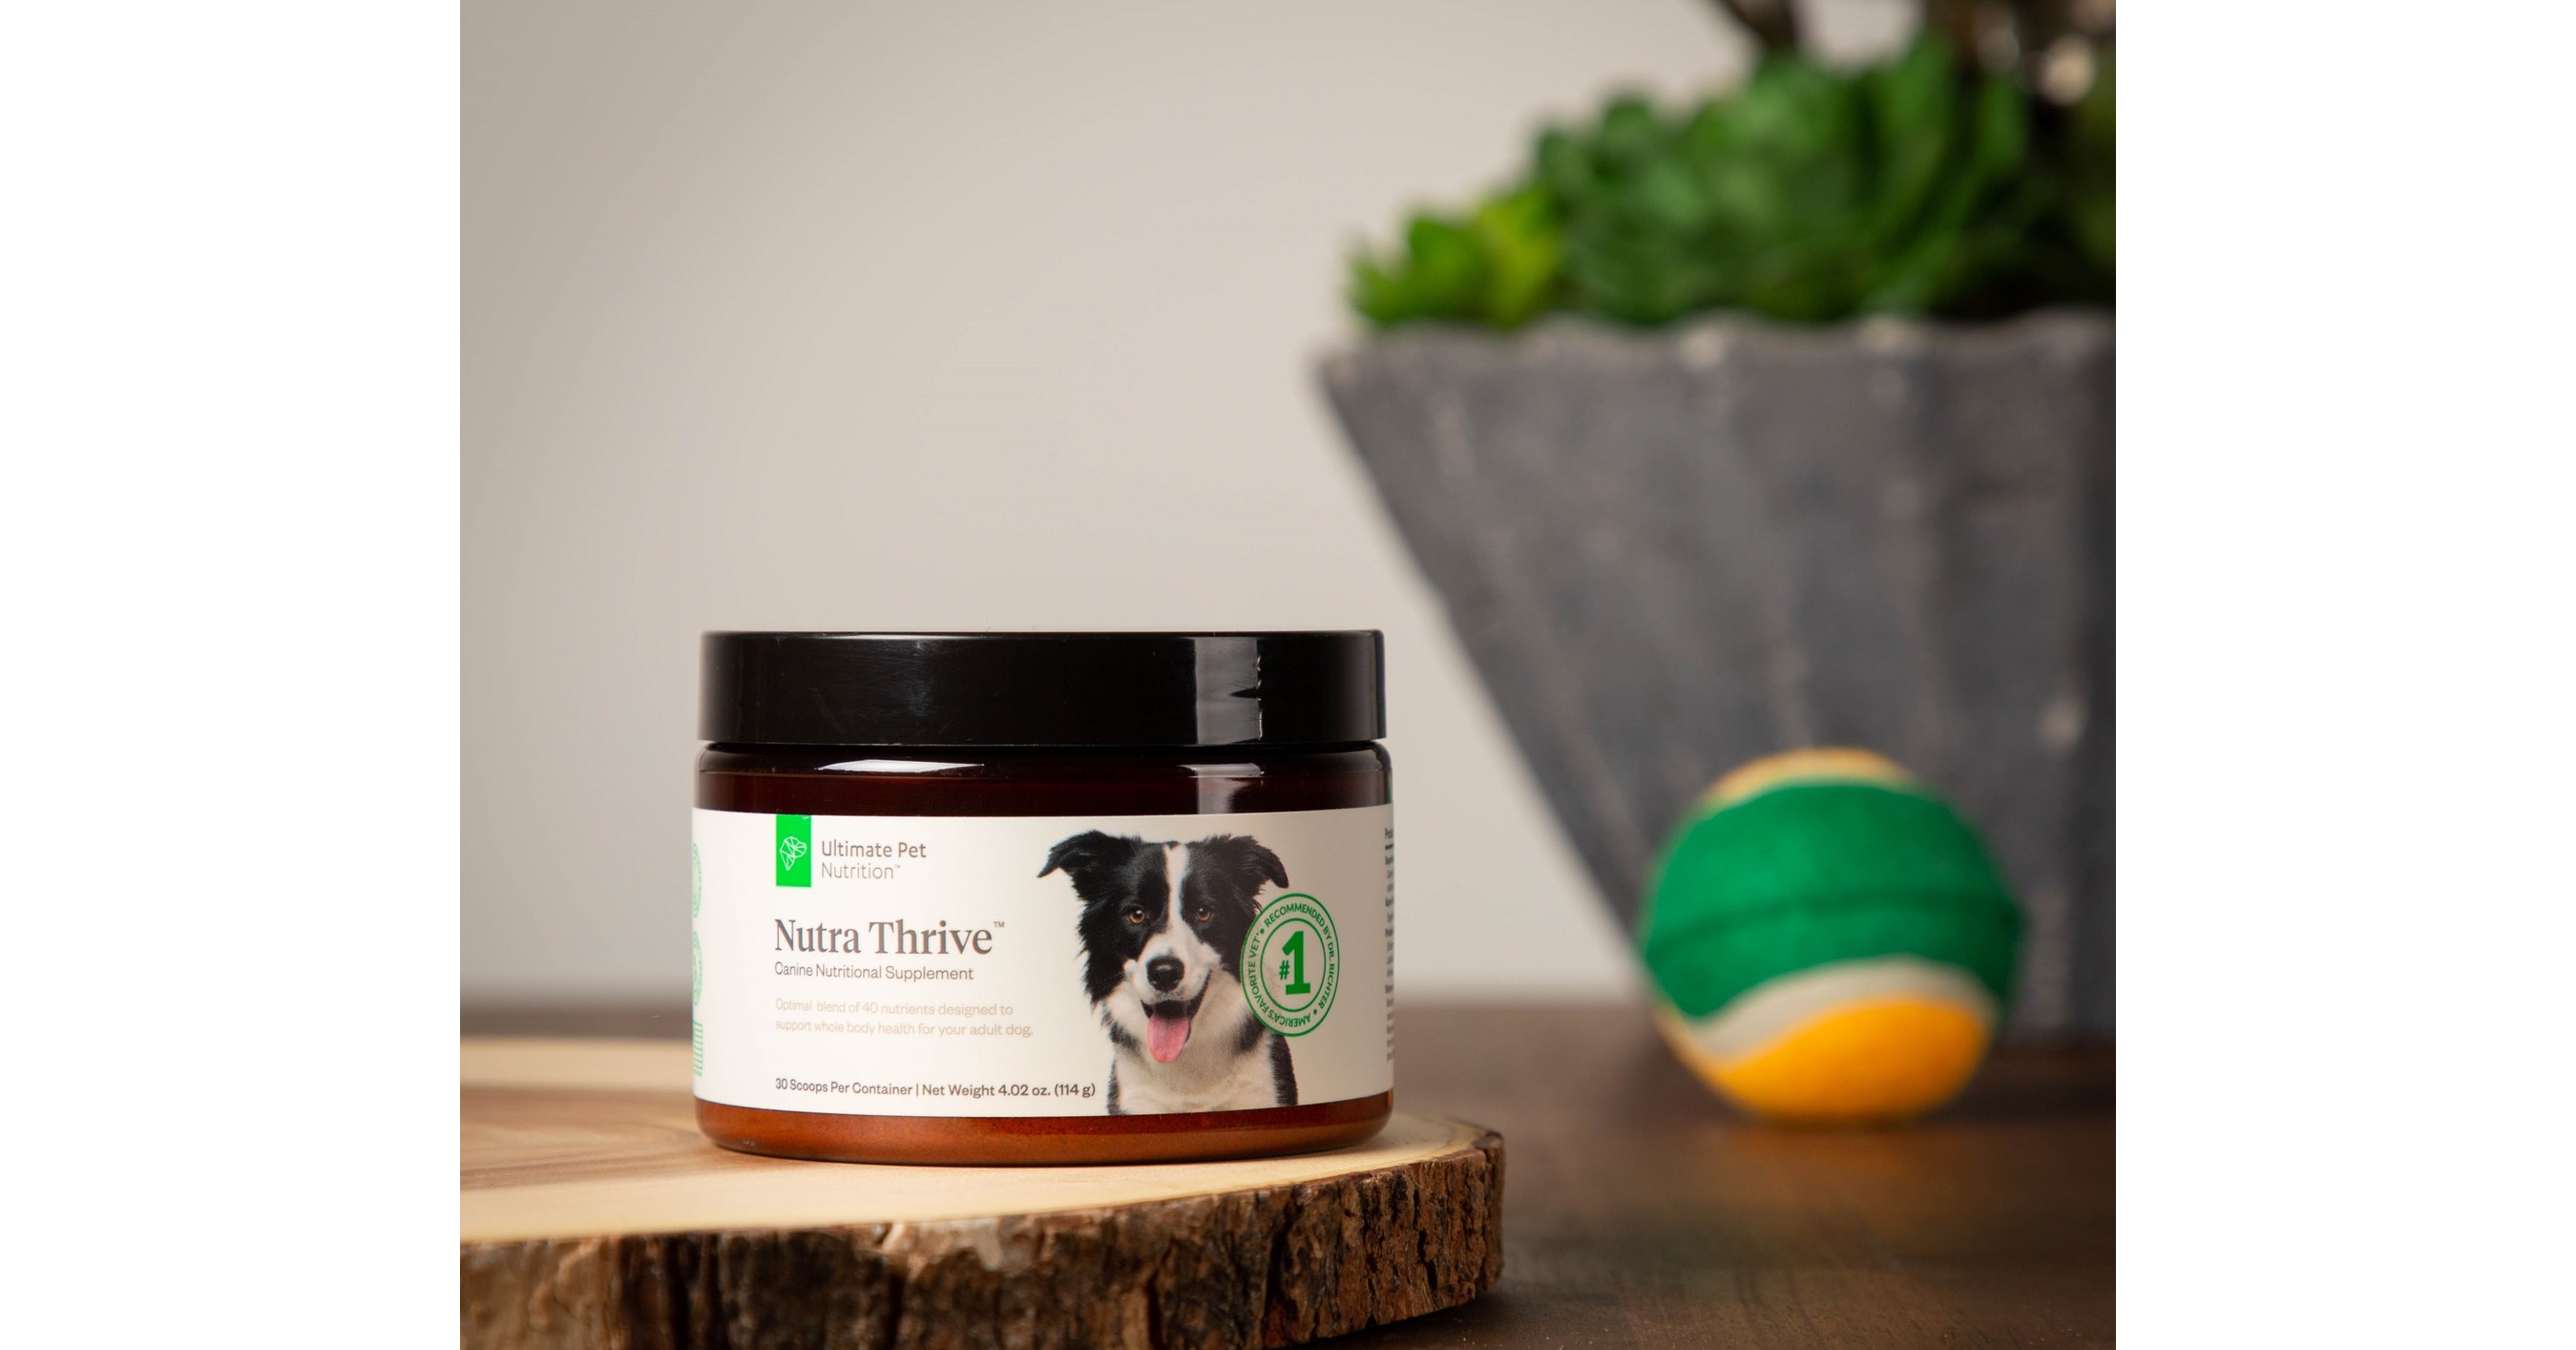 Ultimate Pet Nutrition Celebrates Over 350,000 YTD Units Sold of Award-Winning Canine Nutritional Supplement, Ultimate Pet Nutrition Nutra Thrive for Dogs